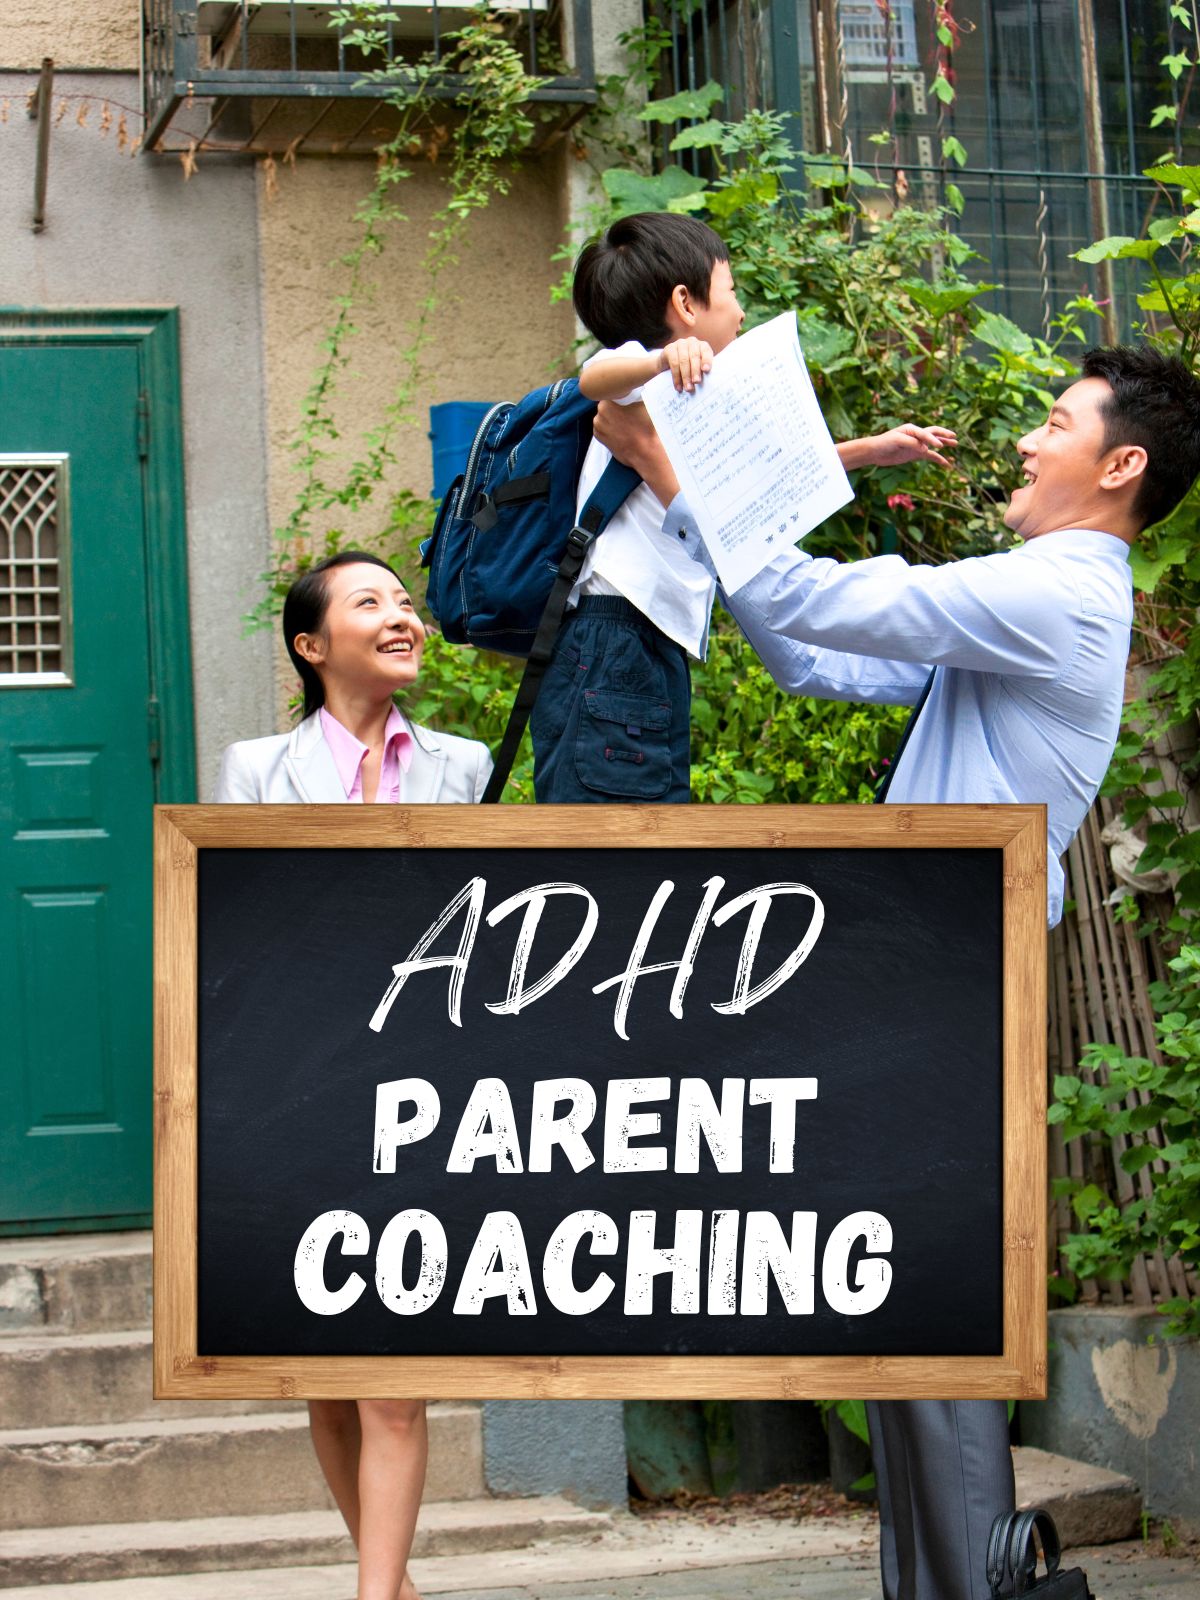 A mother and father with their son, the father is happily lifting up the son who has his backpack on and is holding some school work, with the text "ADHD parent coaching."